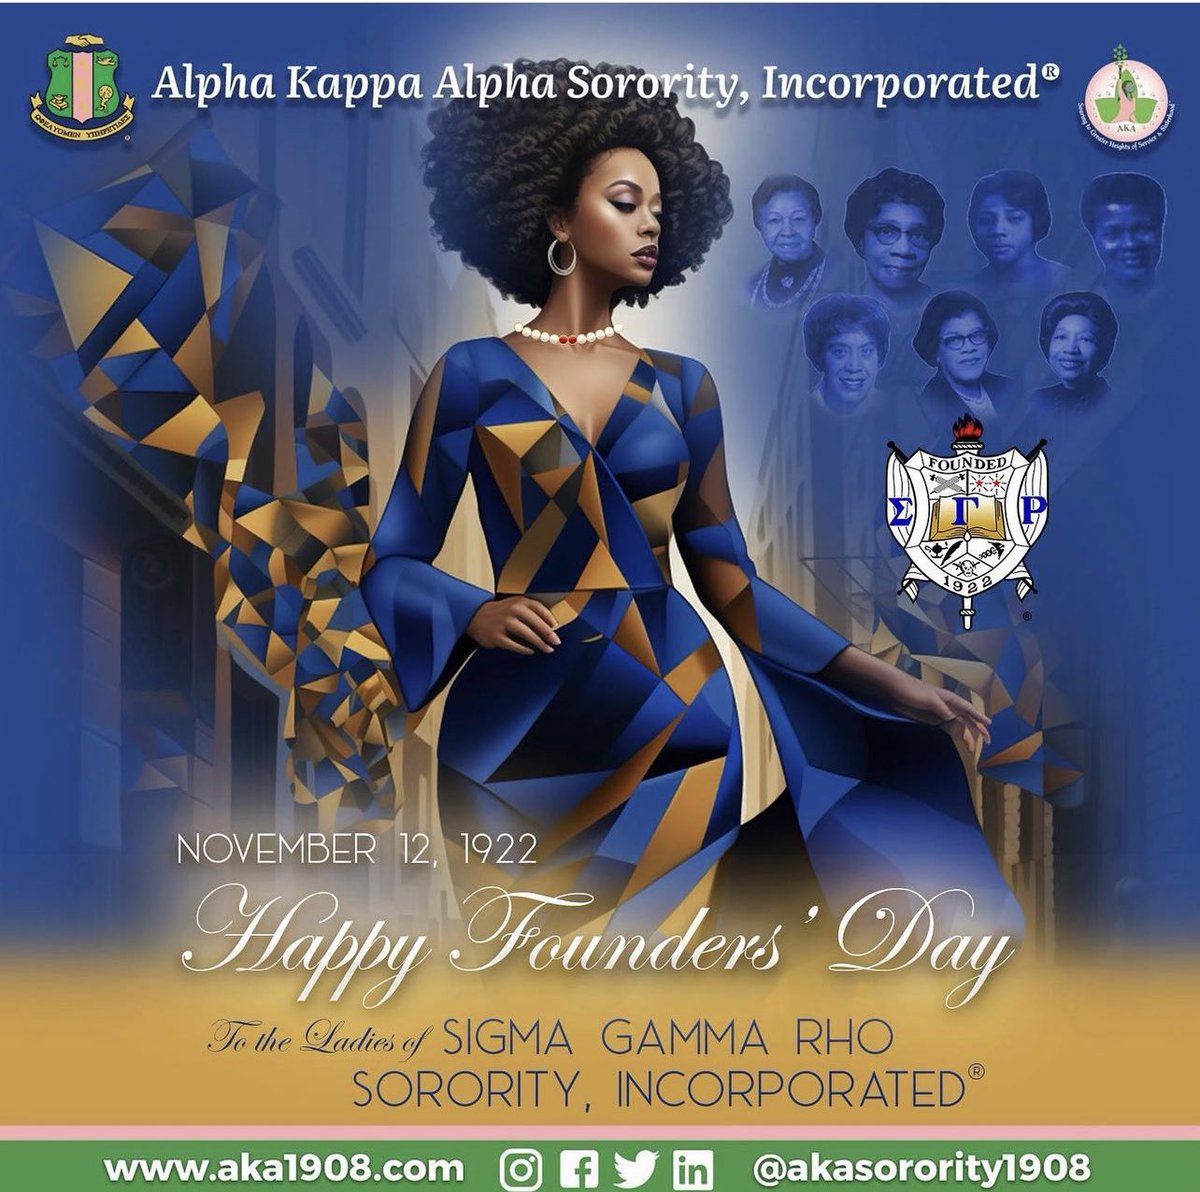 Happy Founders' Day to the Rhoyal Ladies of Sigma Gamma Rho Sorority, Incorporated!
Alpha Kappa Alpha Sorority, Inc. ® would like to congratulate Sigma Gamma Rho as they celebrate 101 years of 'Greater Service, Greater Progress!' #SGRho101 #AKA1908